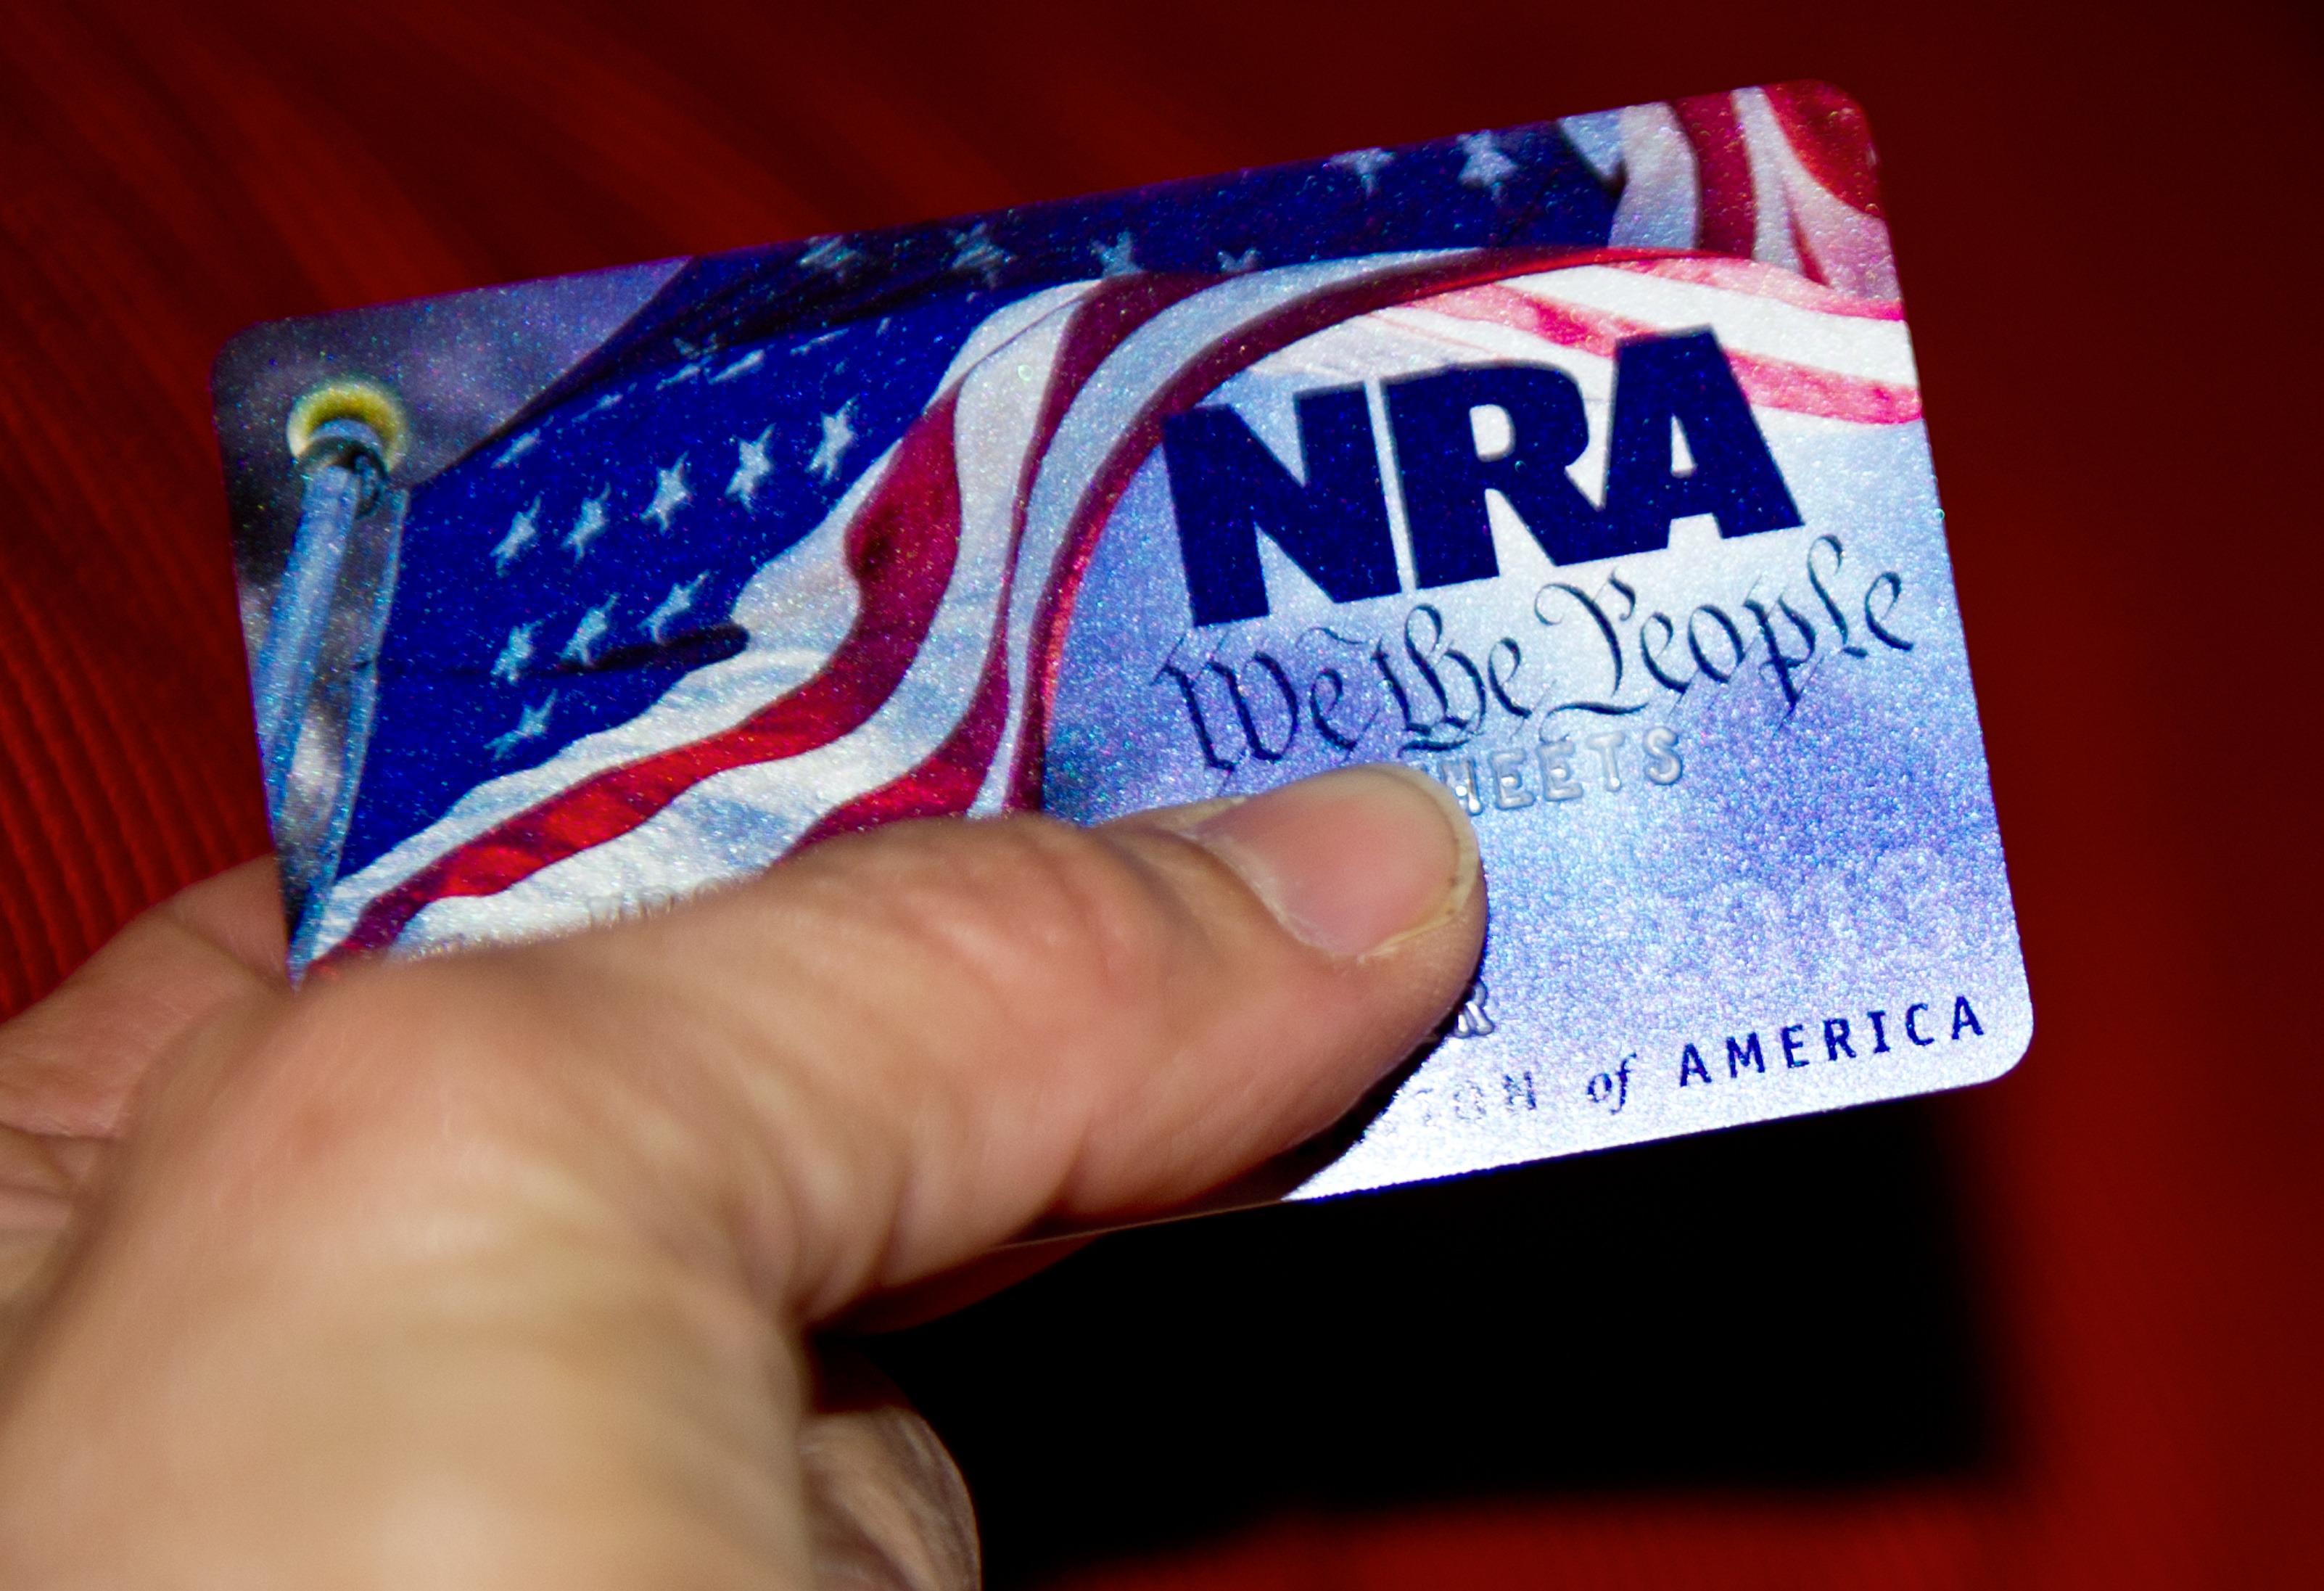 A membership card for the National Rifle Association